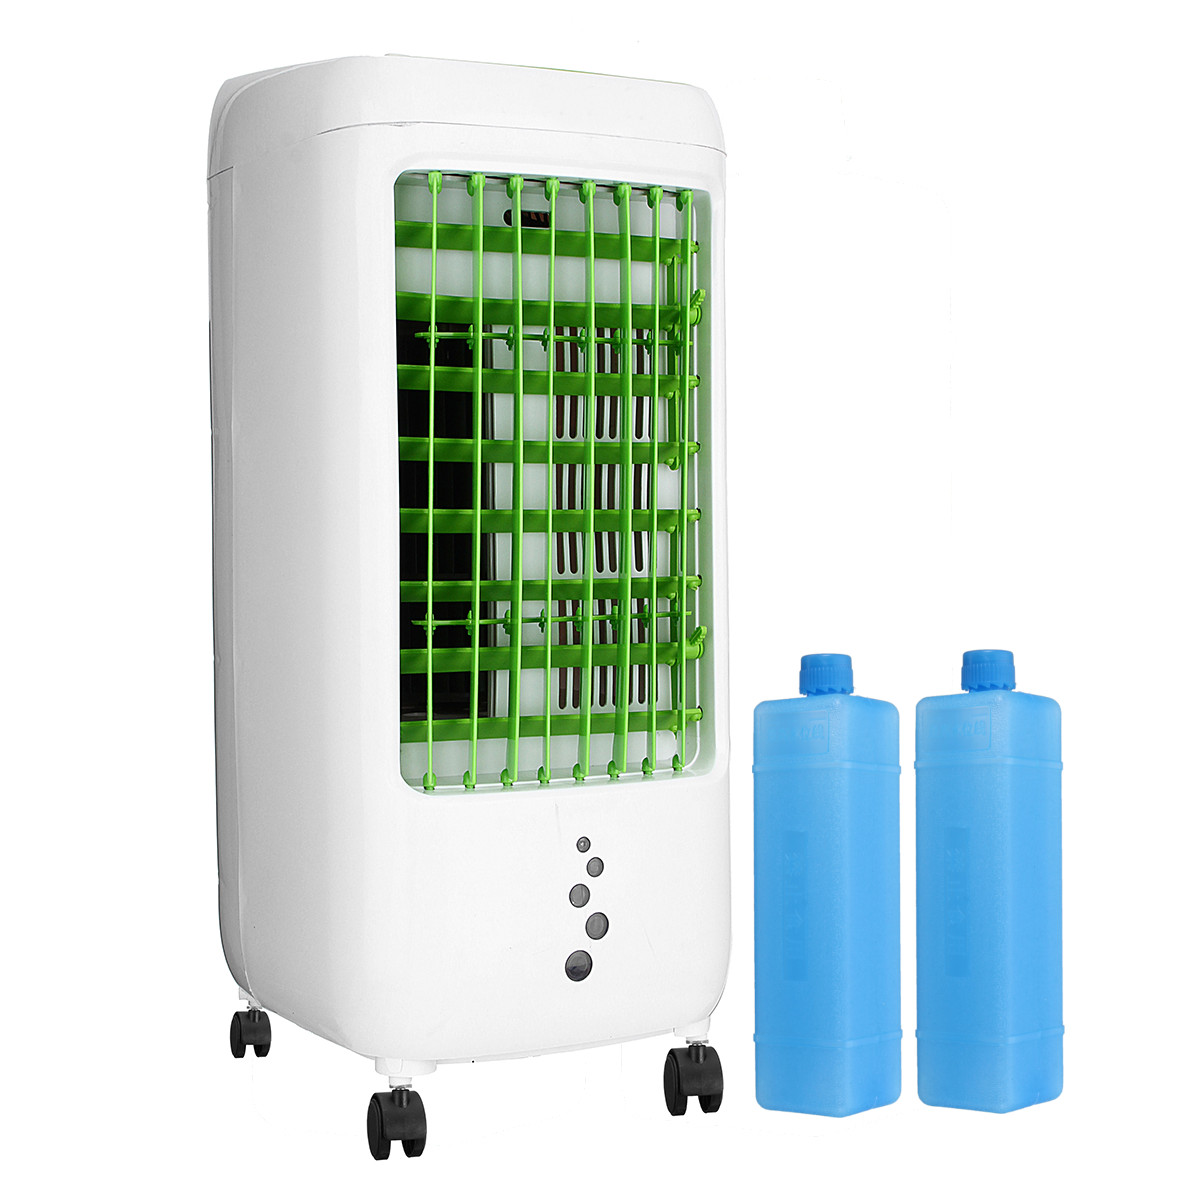 

220V 65W Humidified Air Cooler Portable Evaporative Misting Air Conditioner Purifier Humidifier Fan